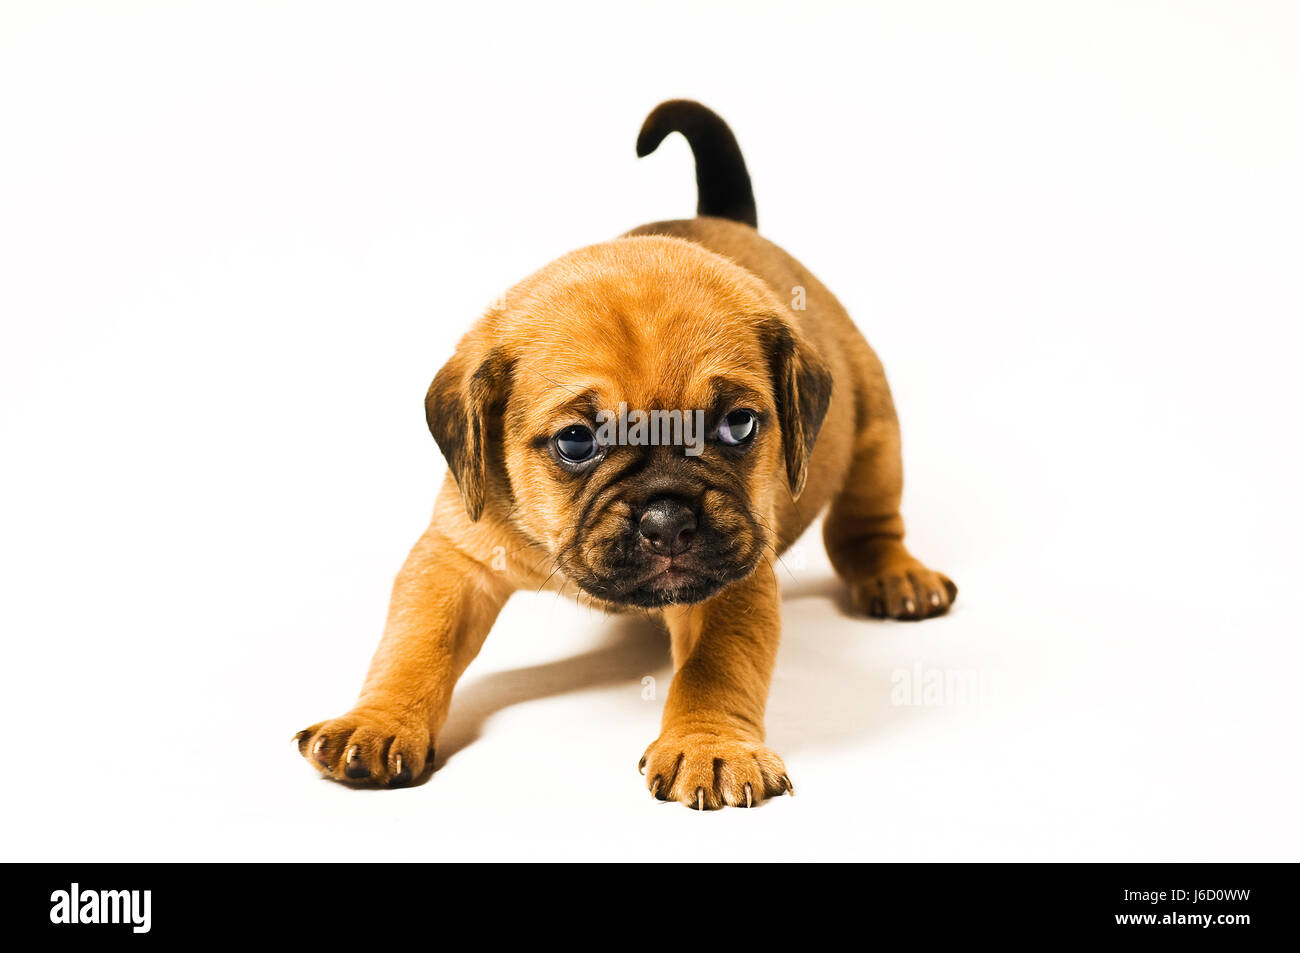 Chiot puggle,3,5 semaines Banque D'Images